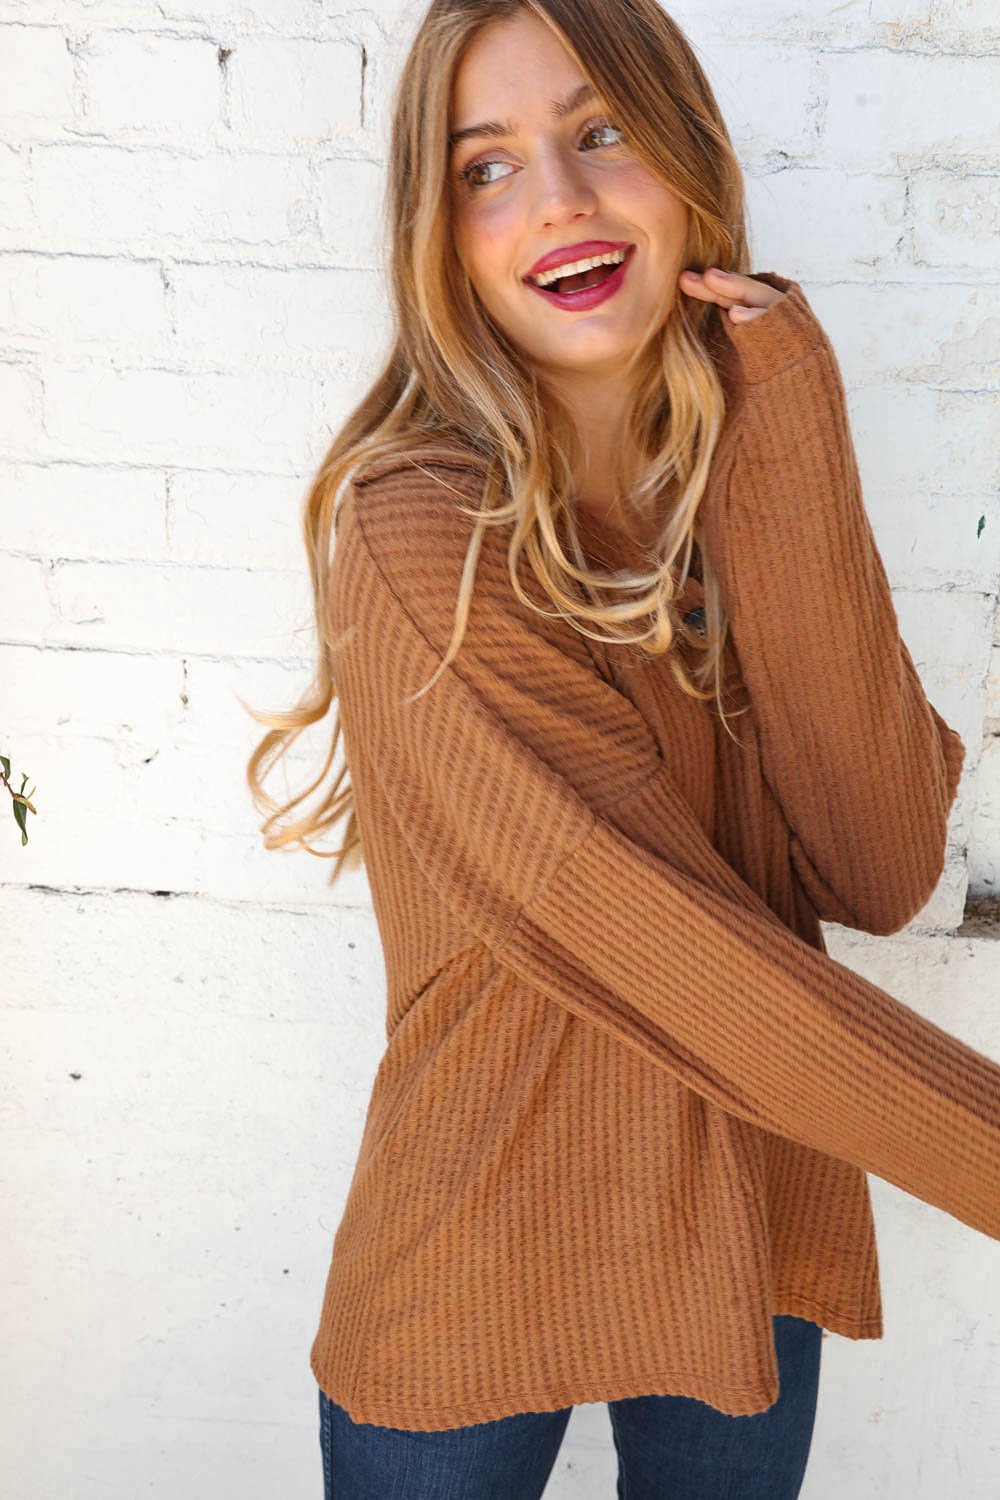 Take It Easy Waffle Knit Top